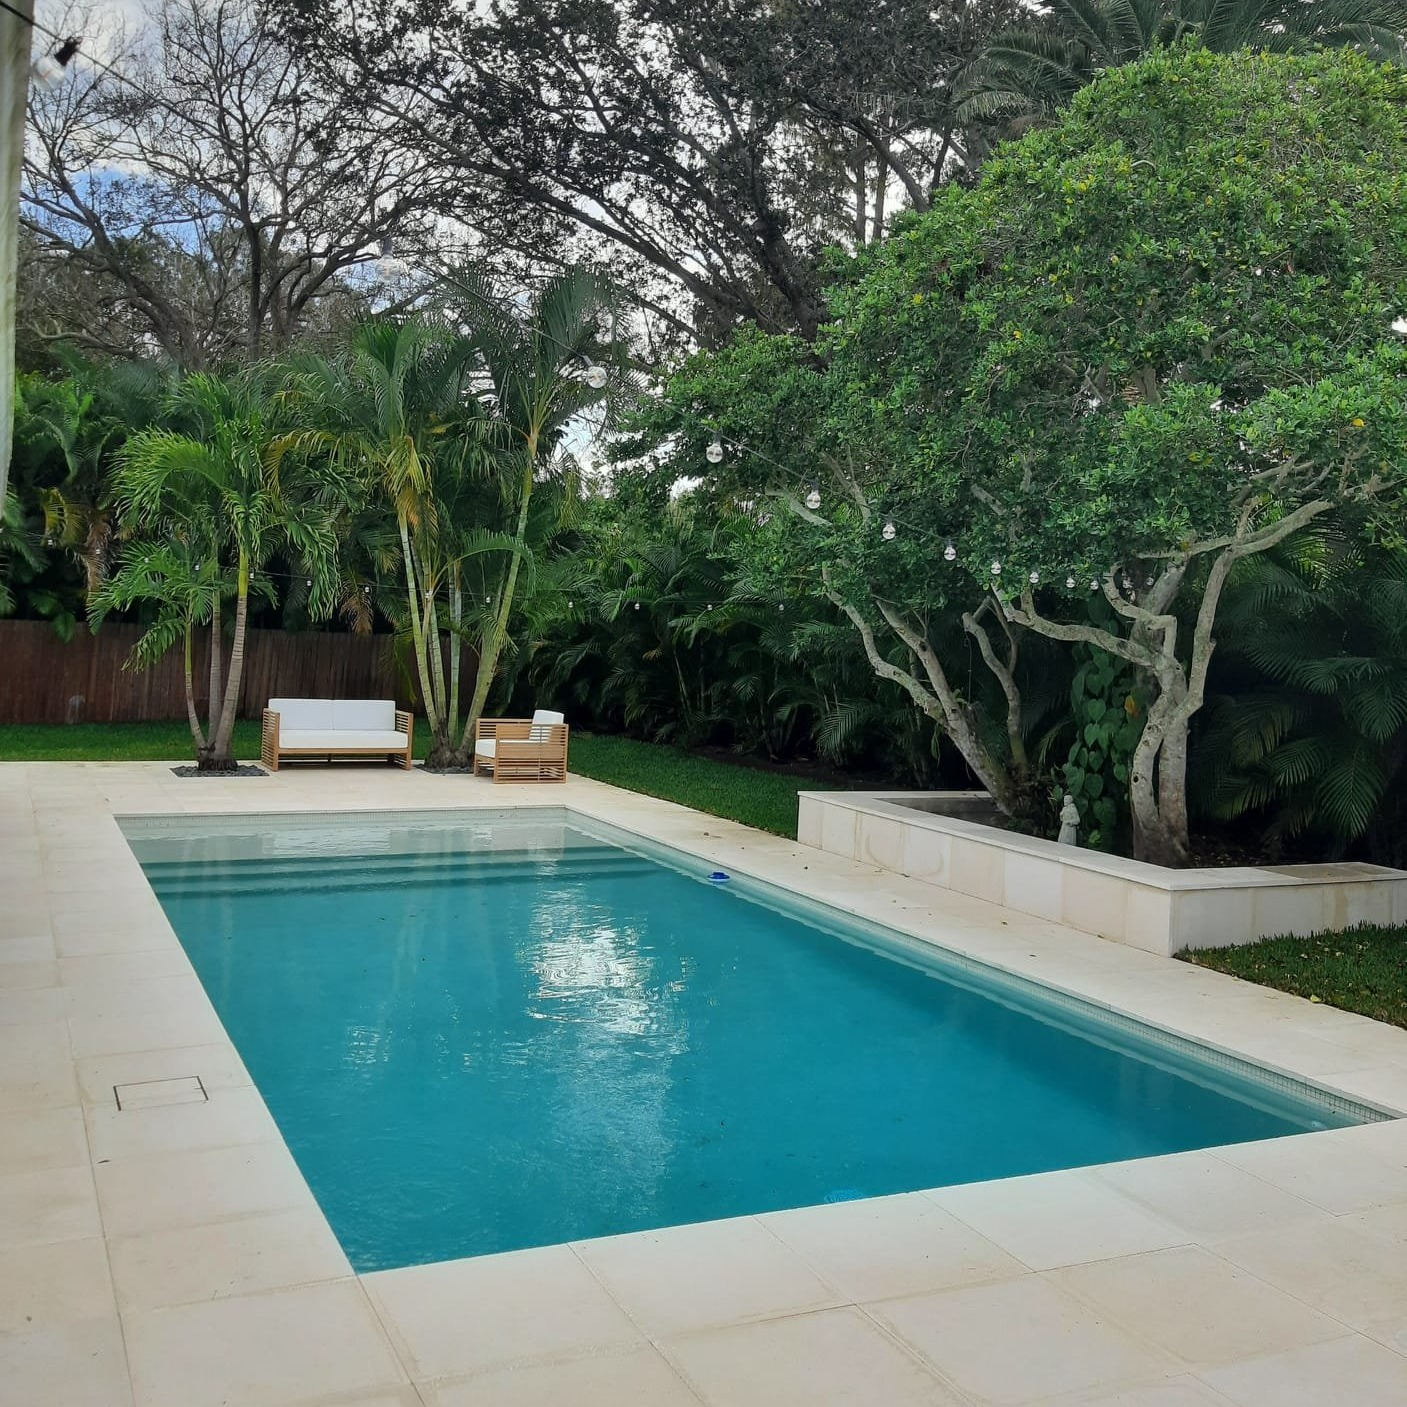 Why You Should Use Ready-Mix Concrete for Your Swimming Pool